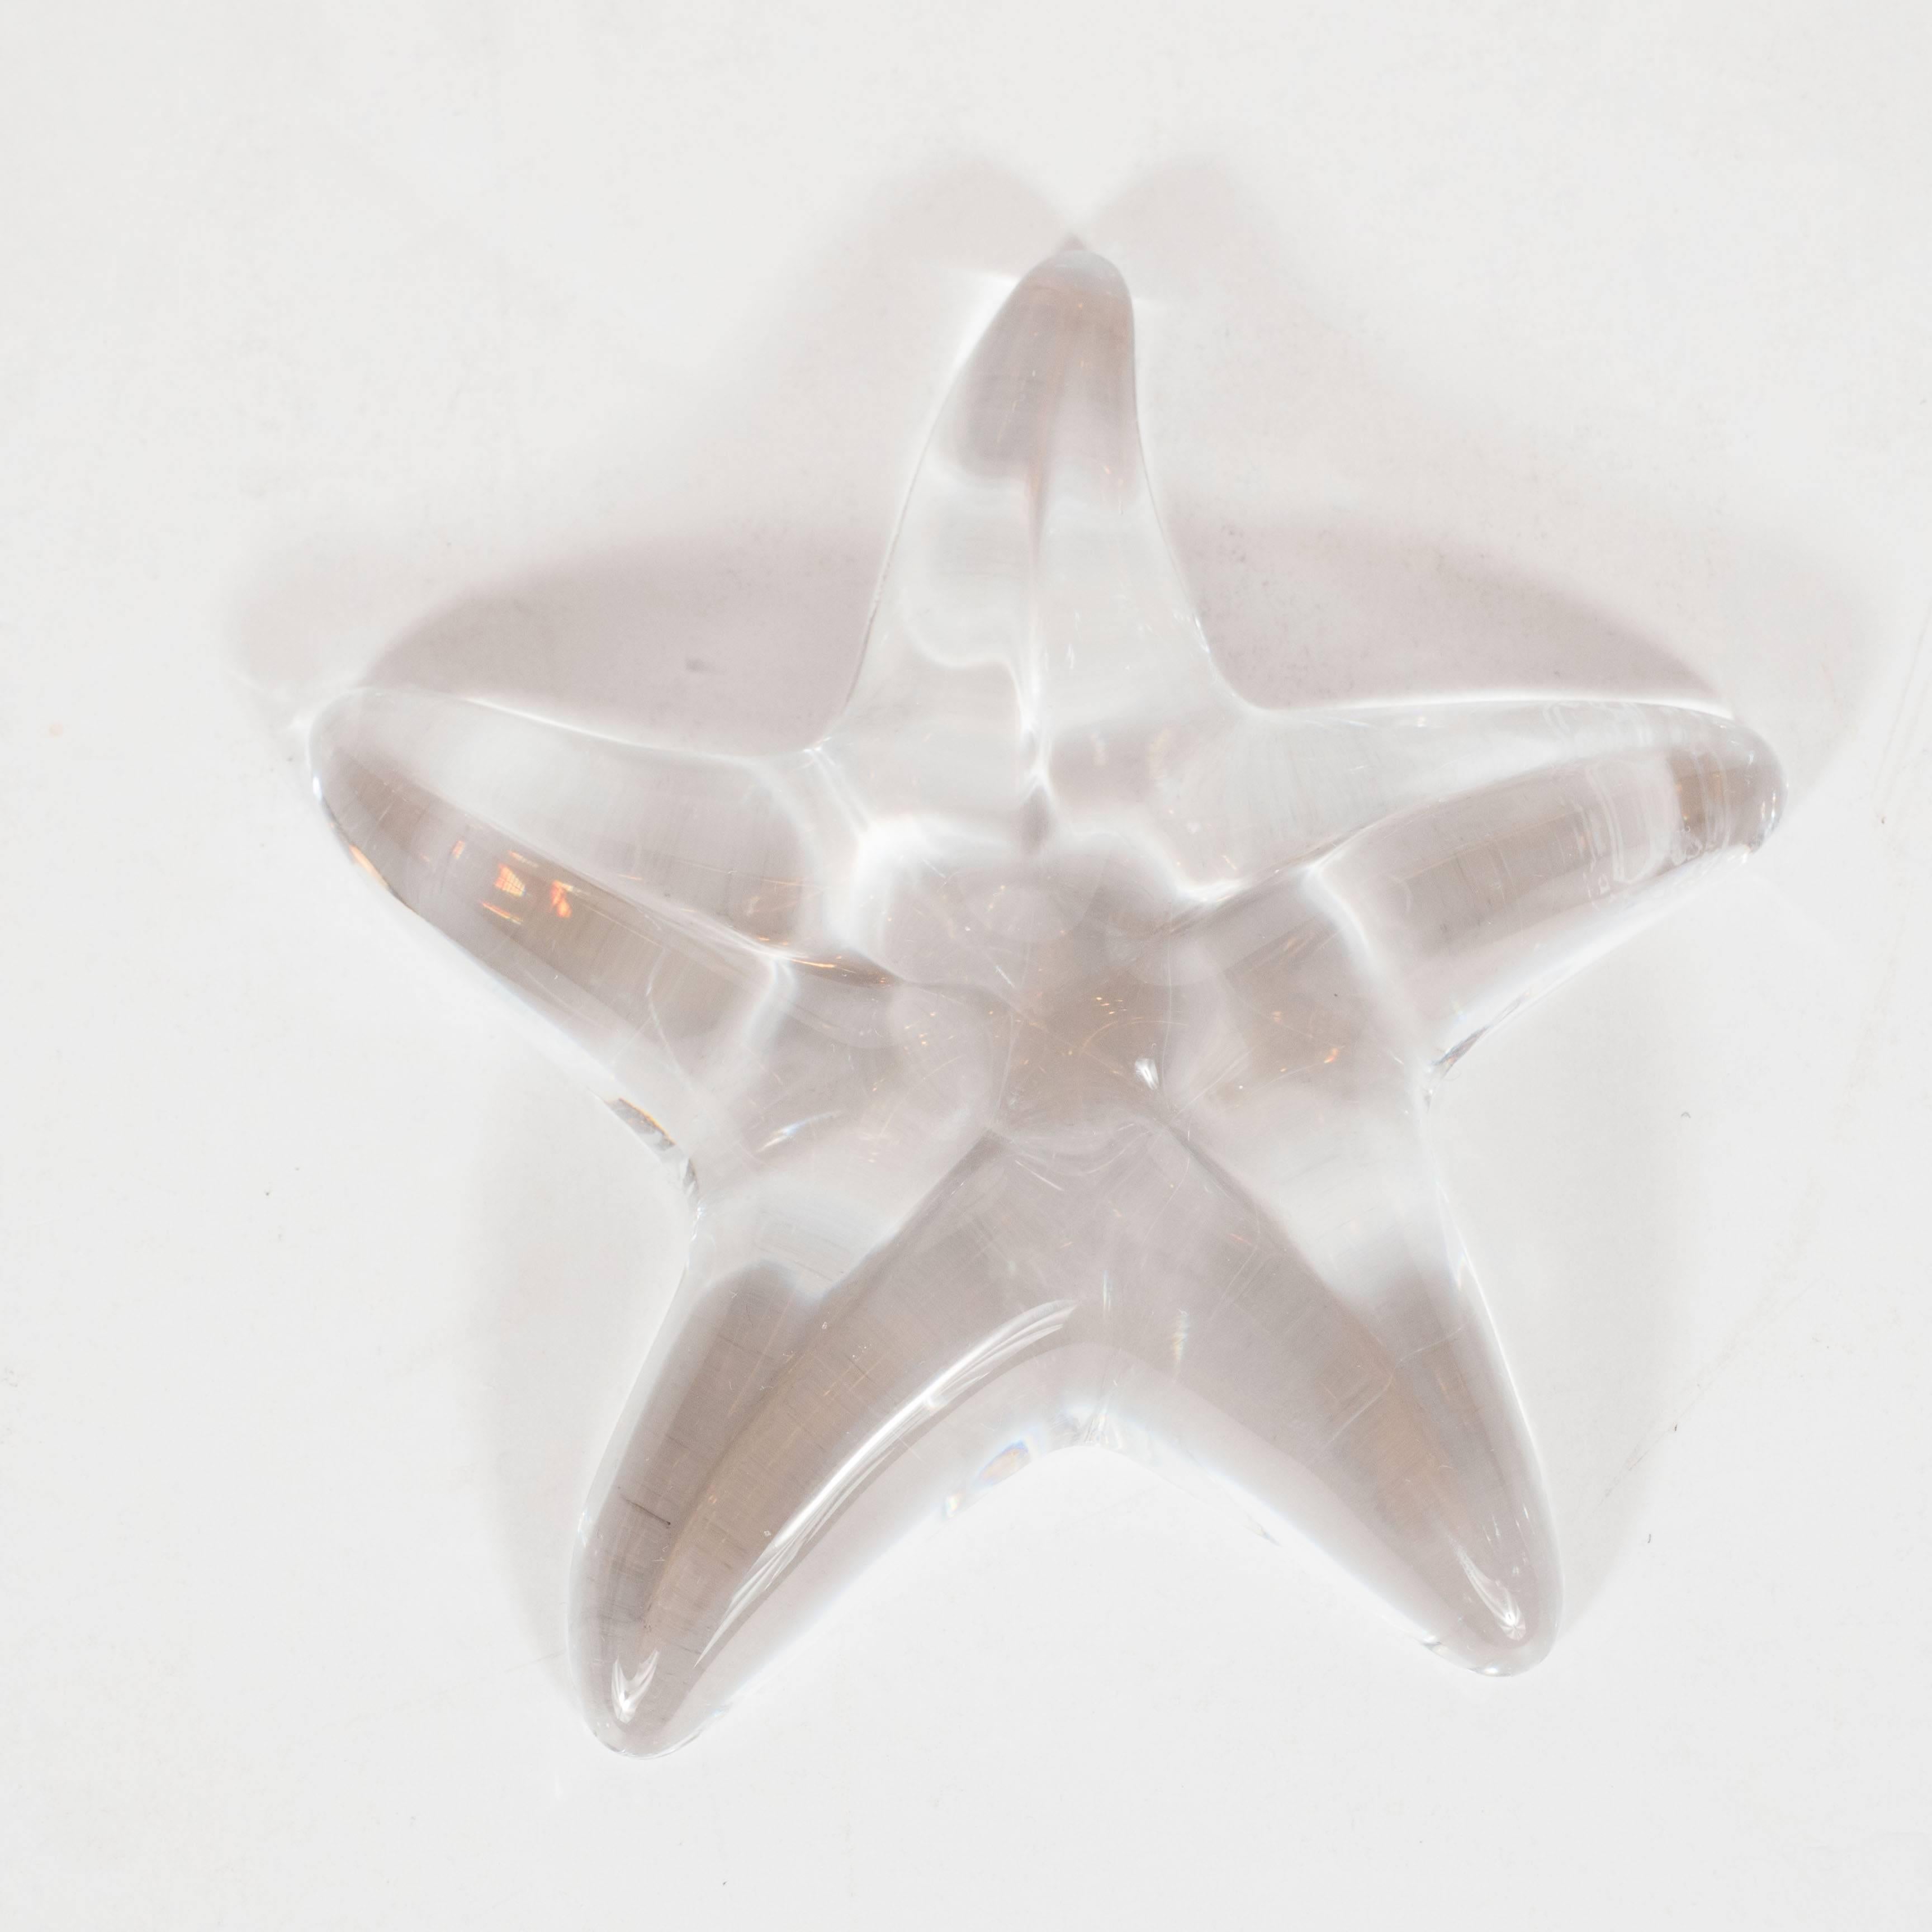 This elegant Mid-Century Modernist Baccarat starfish objet d'art or paperweight features four gracefully curving tendrils with subtle imprinted depressions. It is signed 